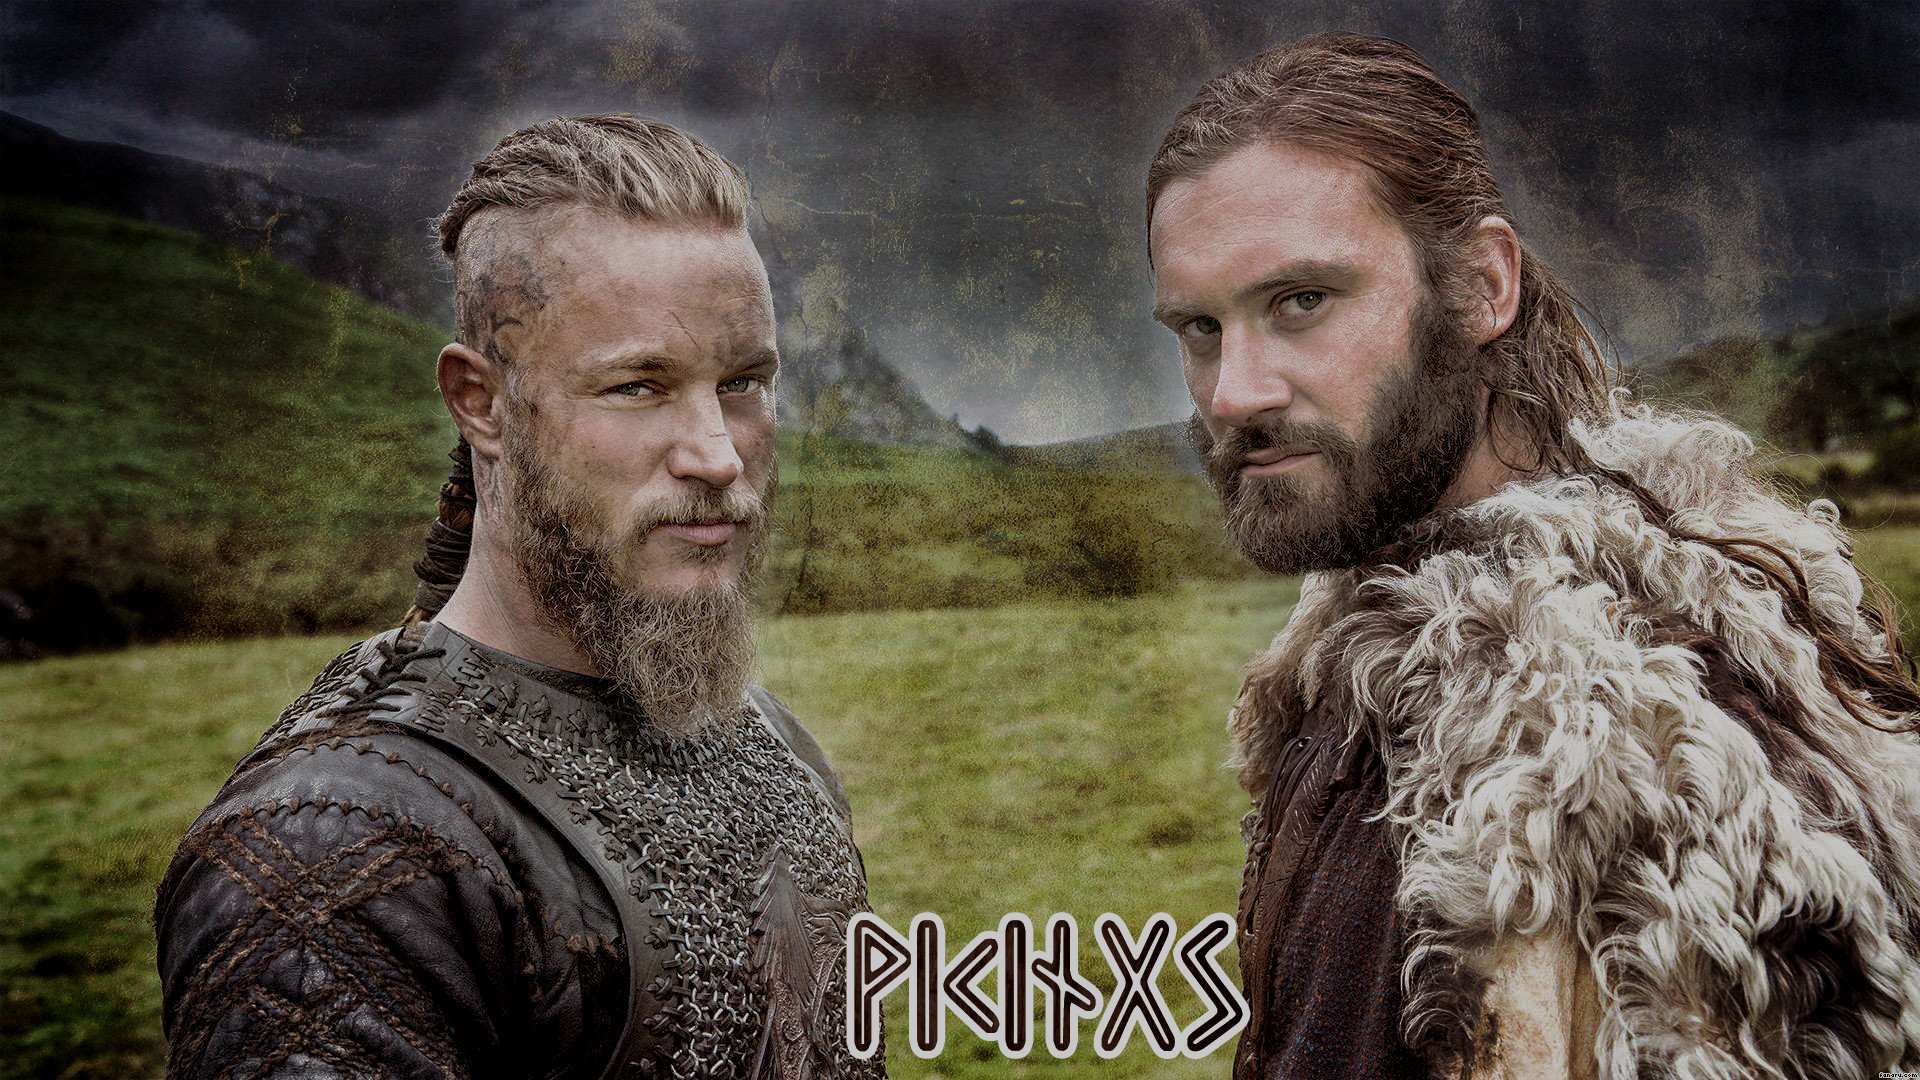 1920x1080 ... Wallpaper : Vikings, Rollo and Ragnar. by Leikn